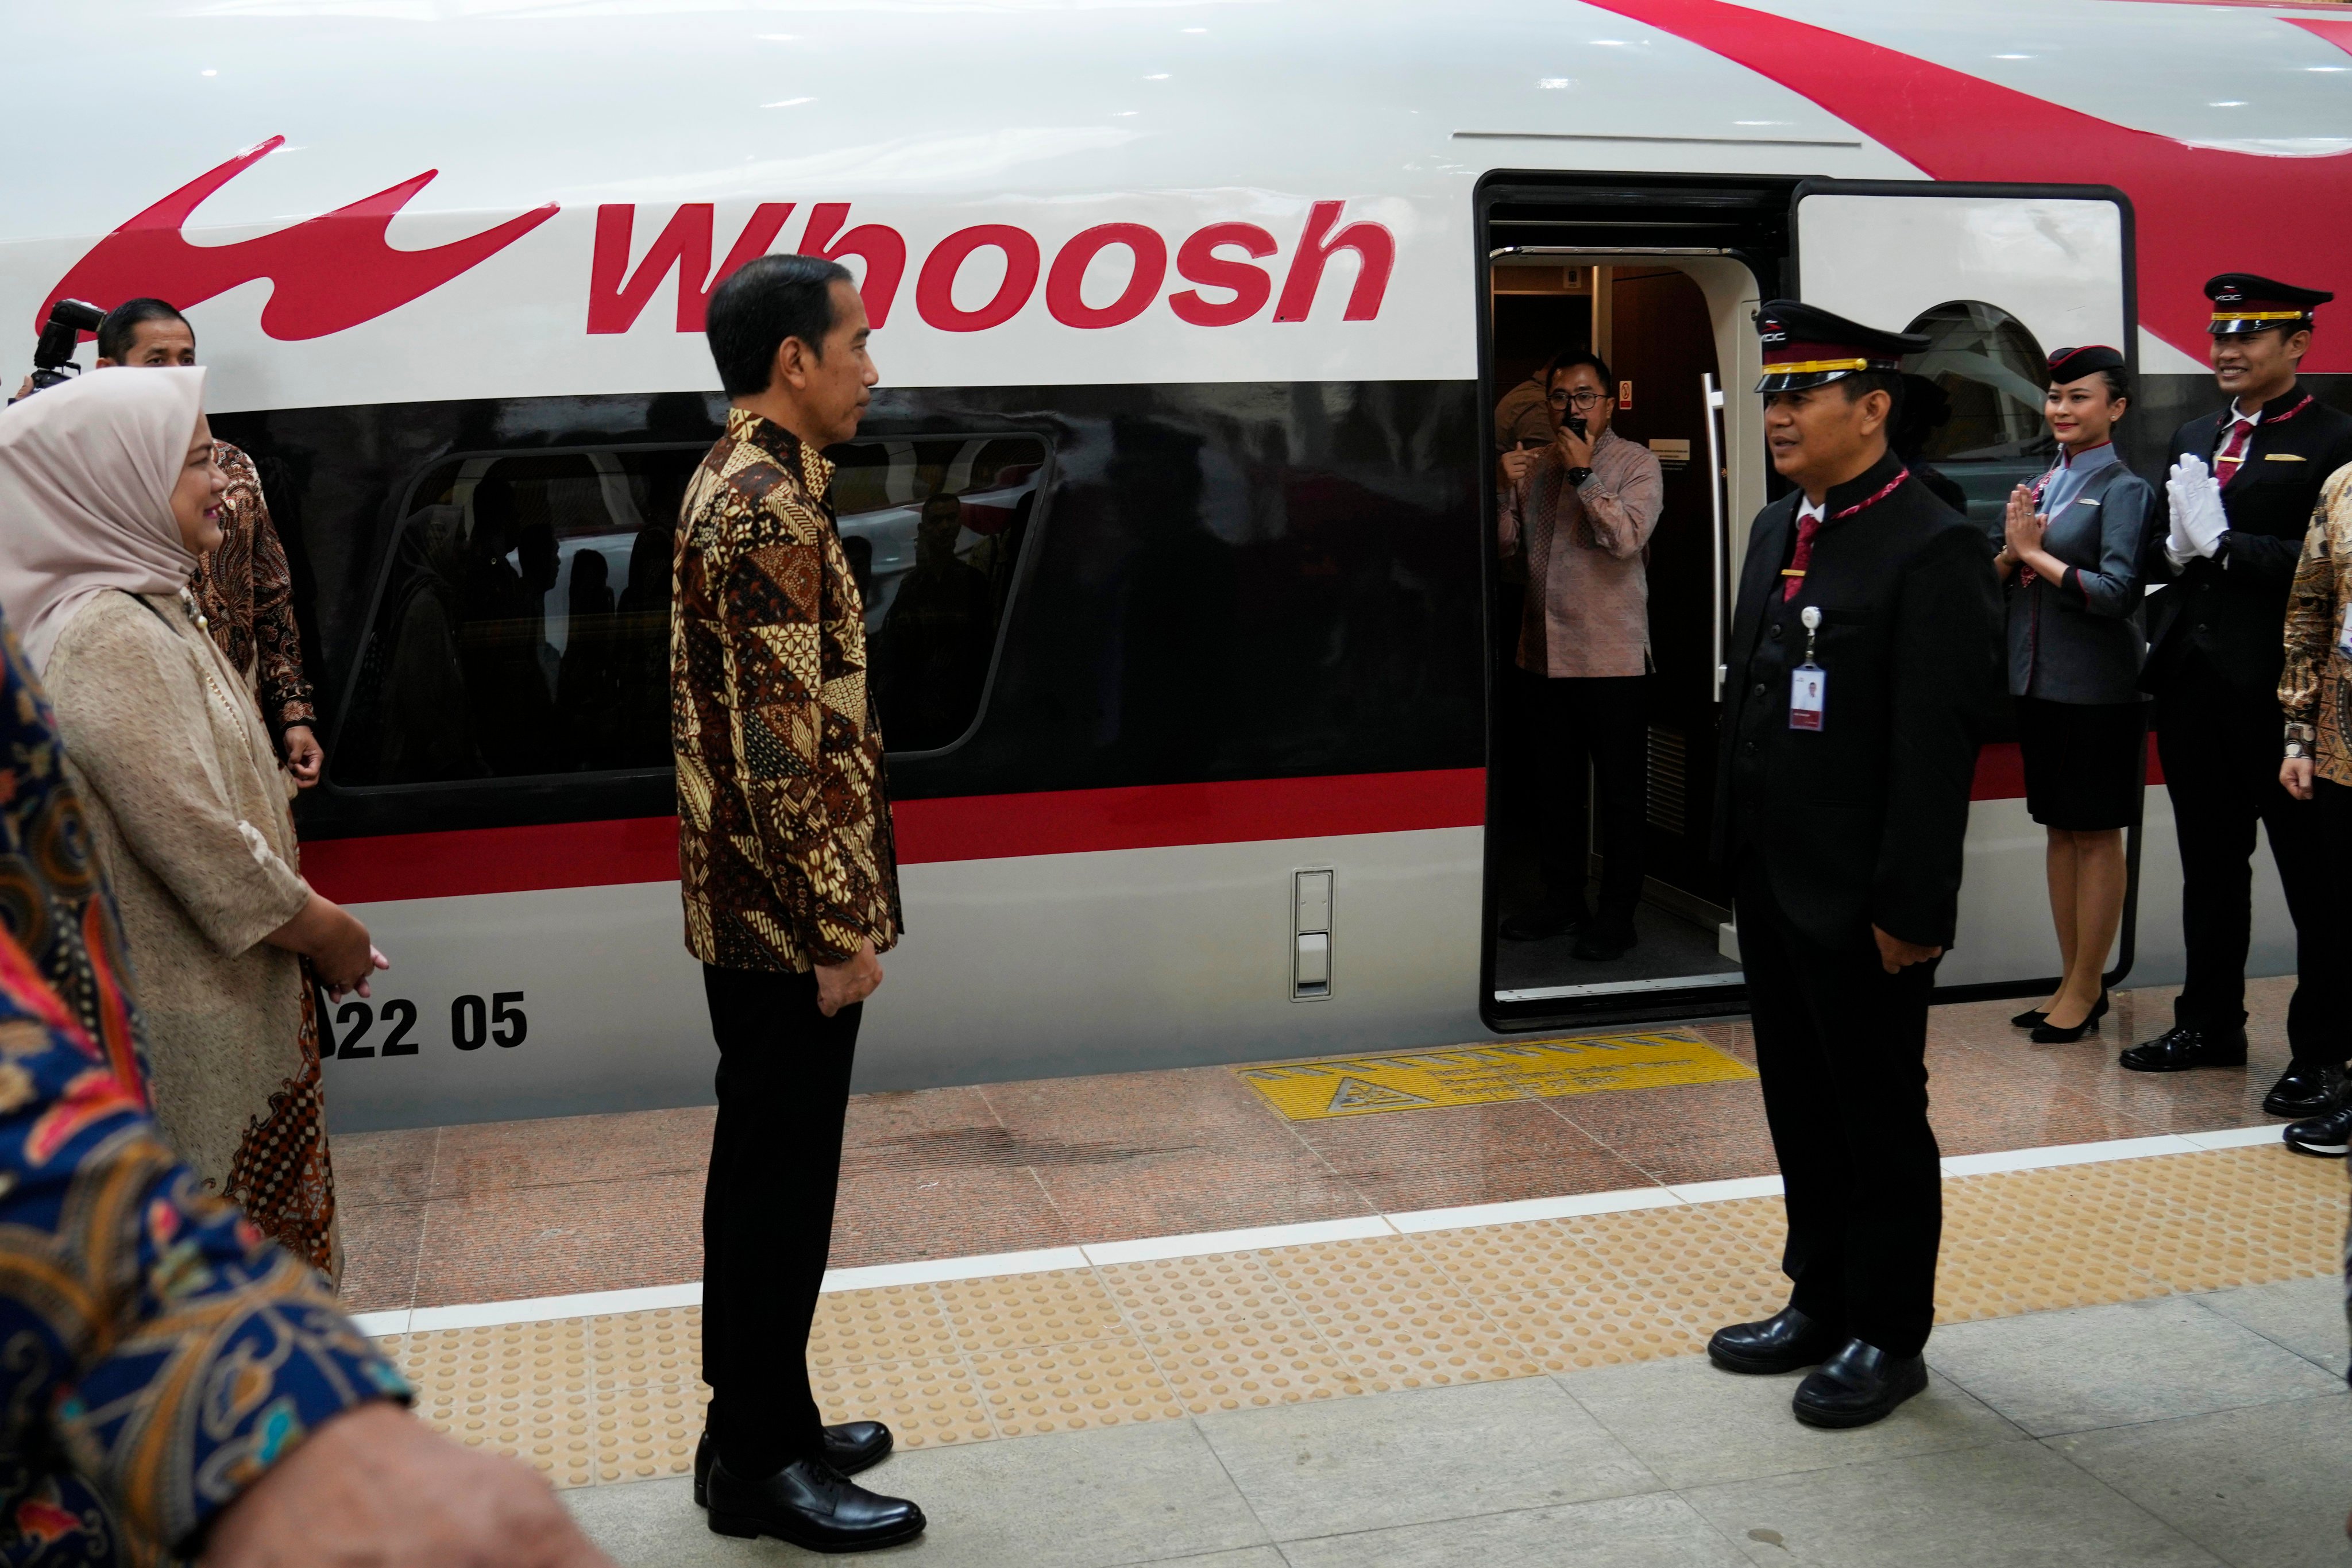 President Joko Widodo at the launch on October 2 of Indonesia’s high-speed railway at Halim station in Jakarta, a key project under China’s Belt and Road Initiative. Photo: AP